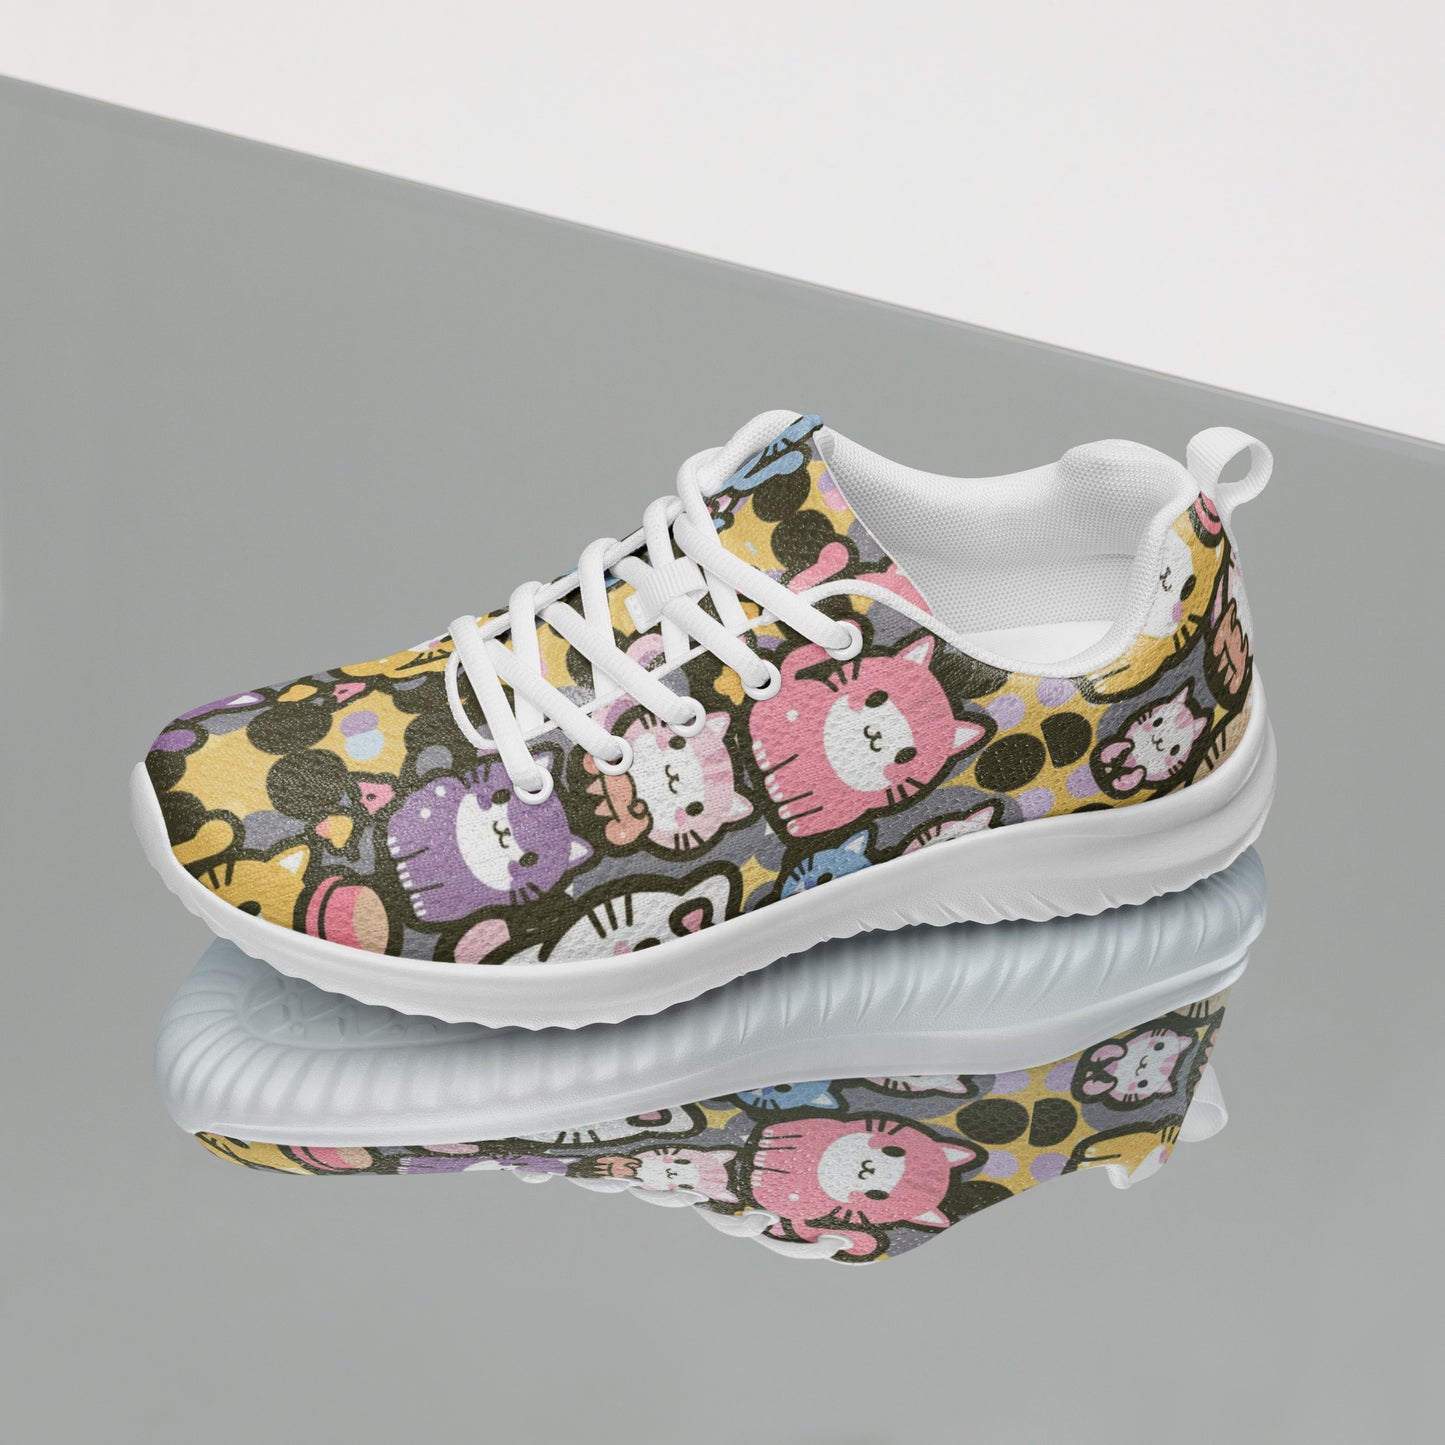 Kawaii Playful Cats Women’s athletic shoes